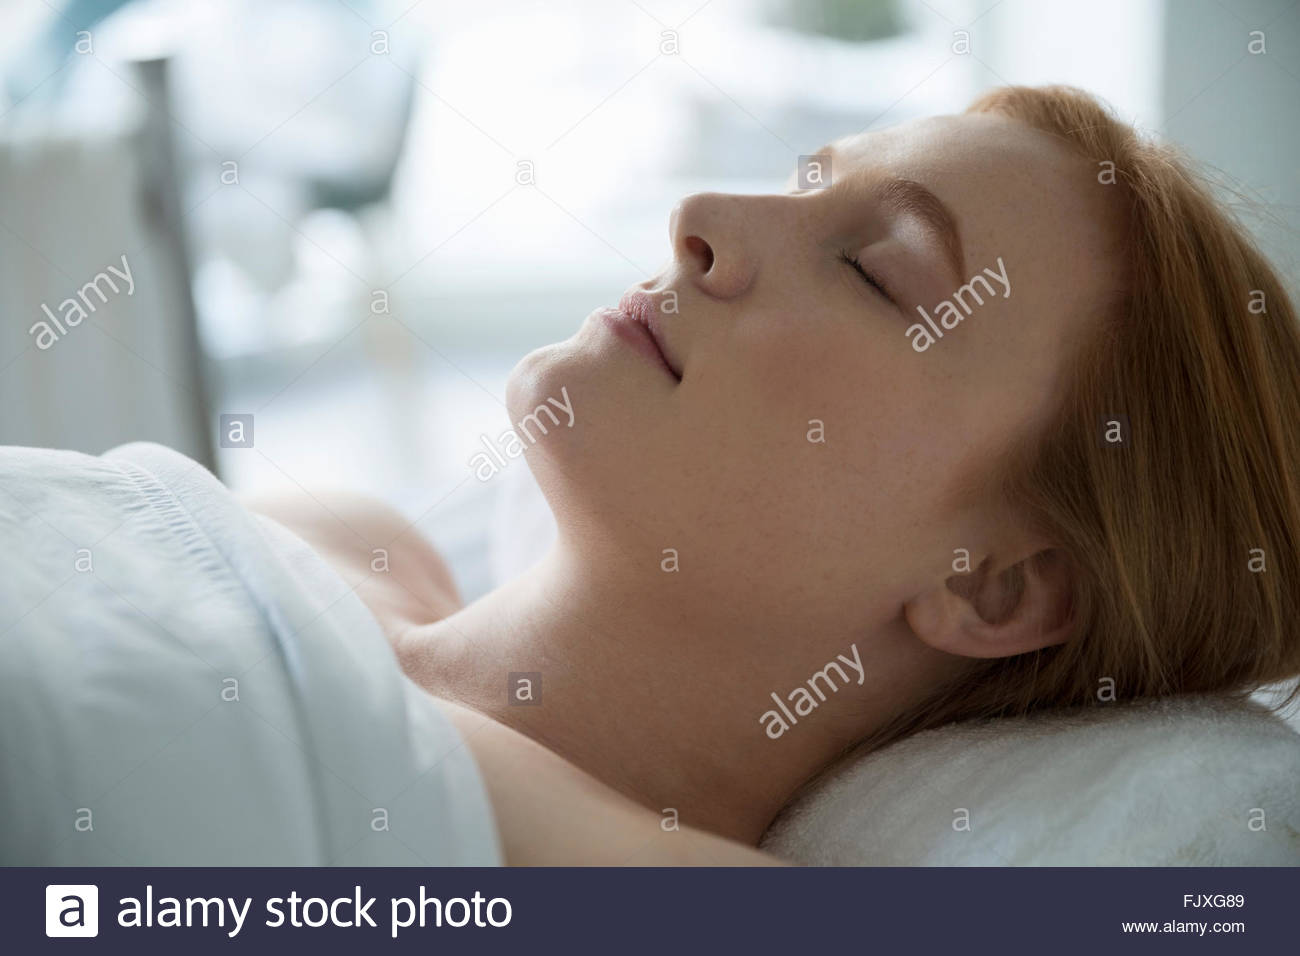 Serene woman laying massage table with eyes closed Stock Photo